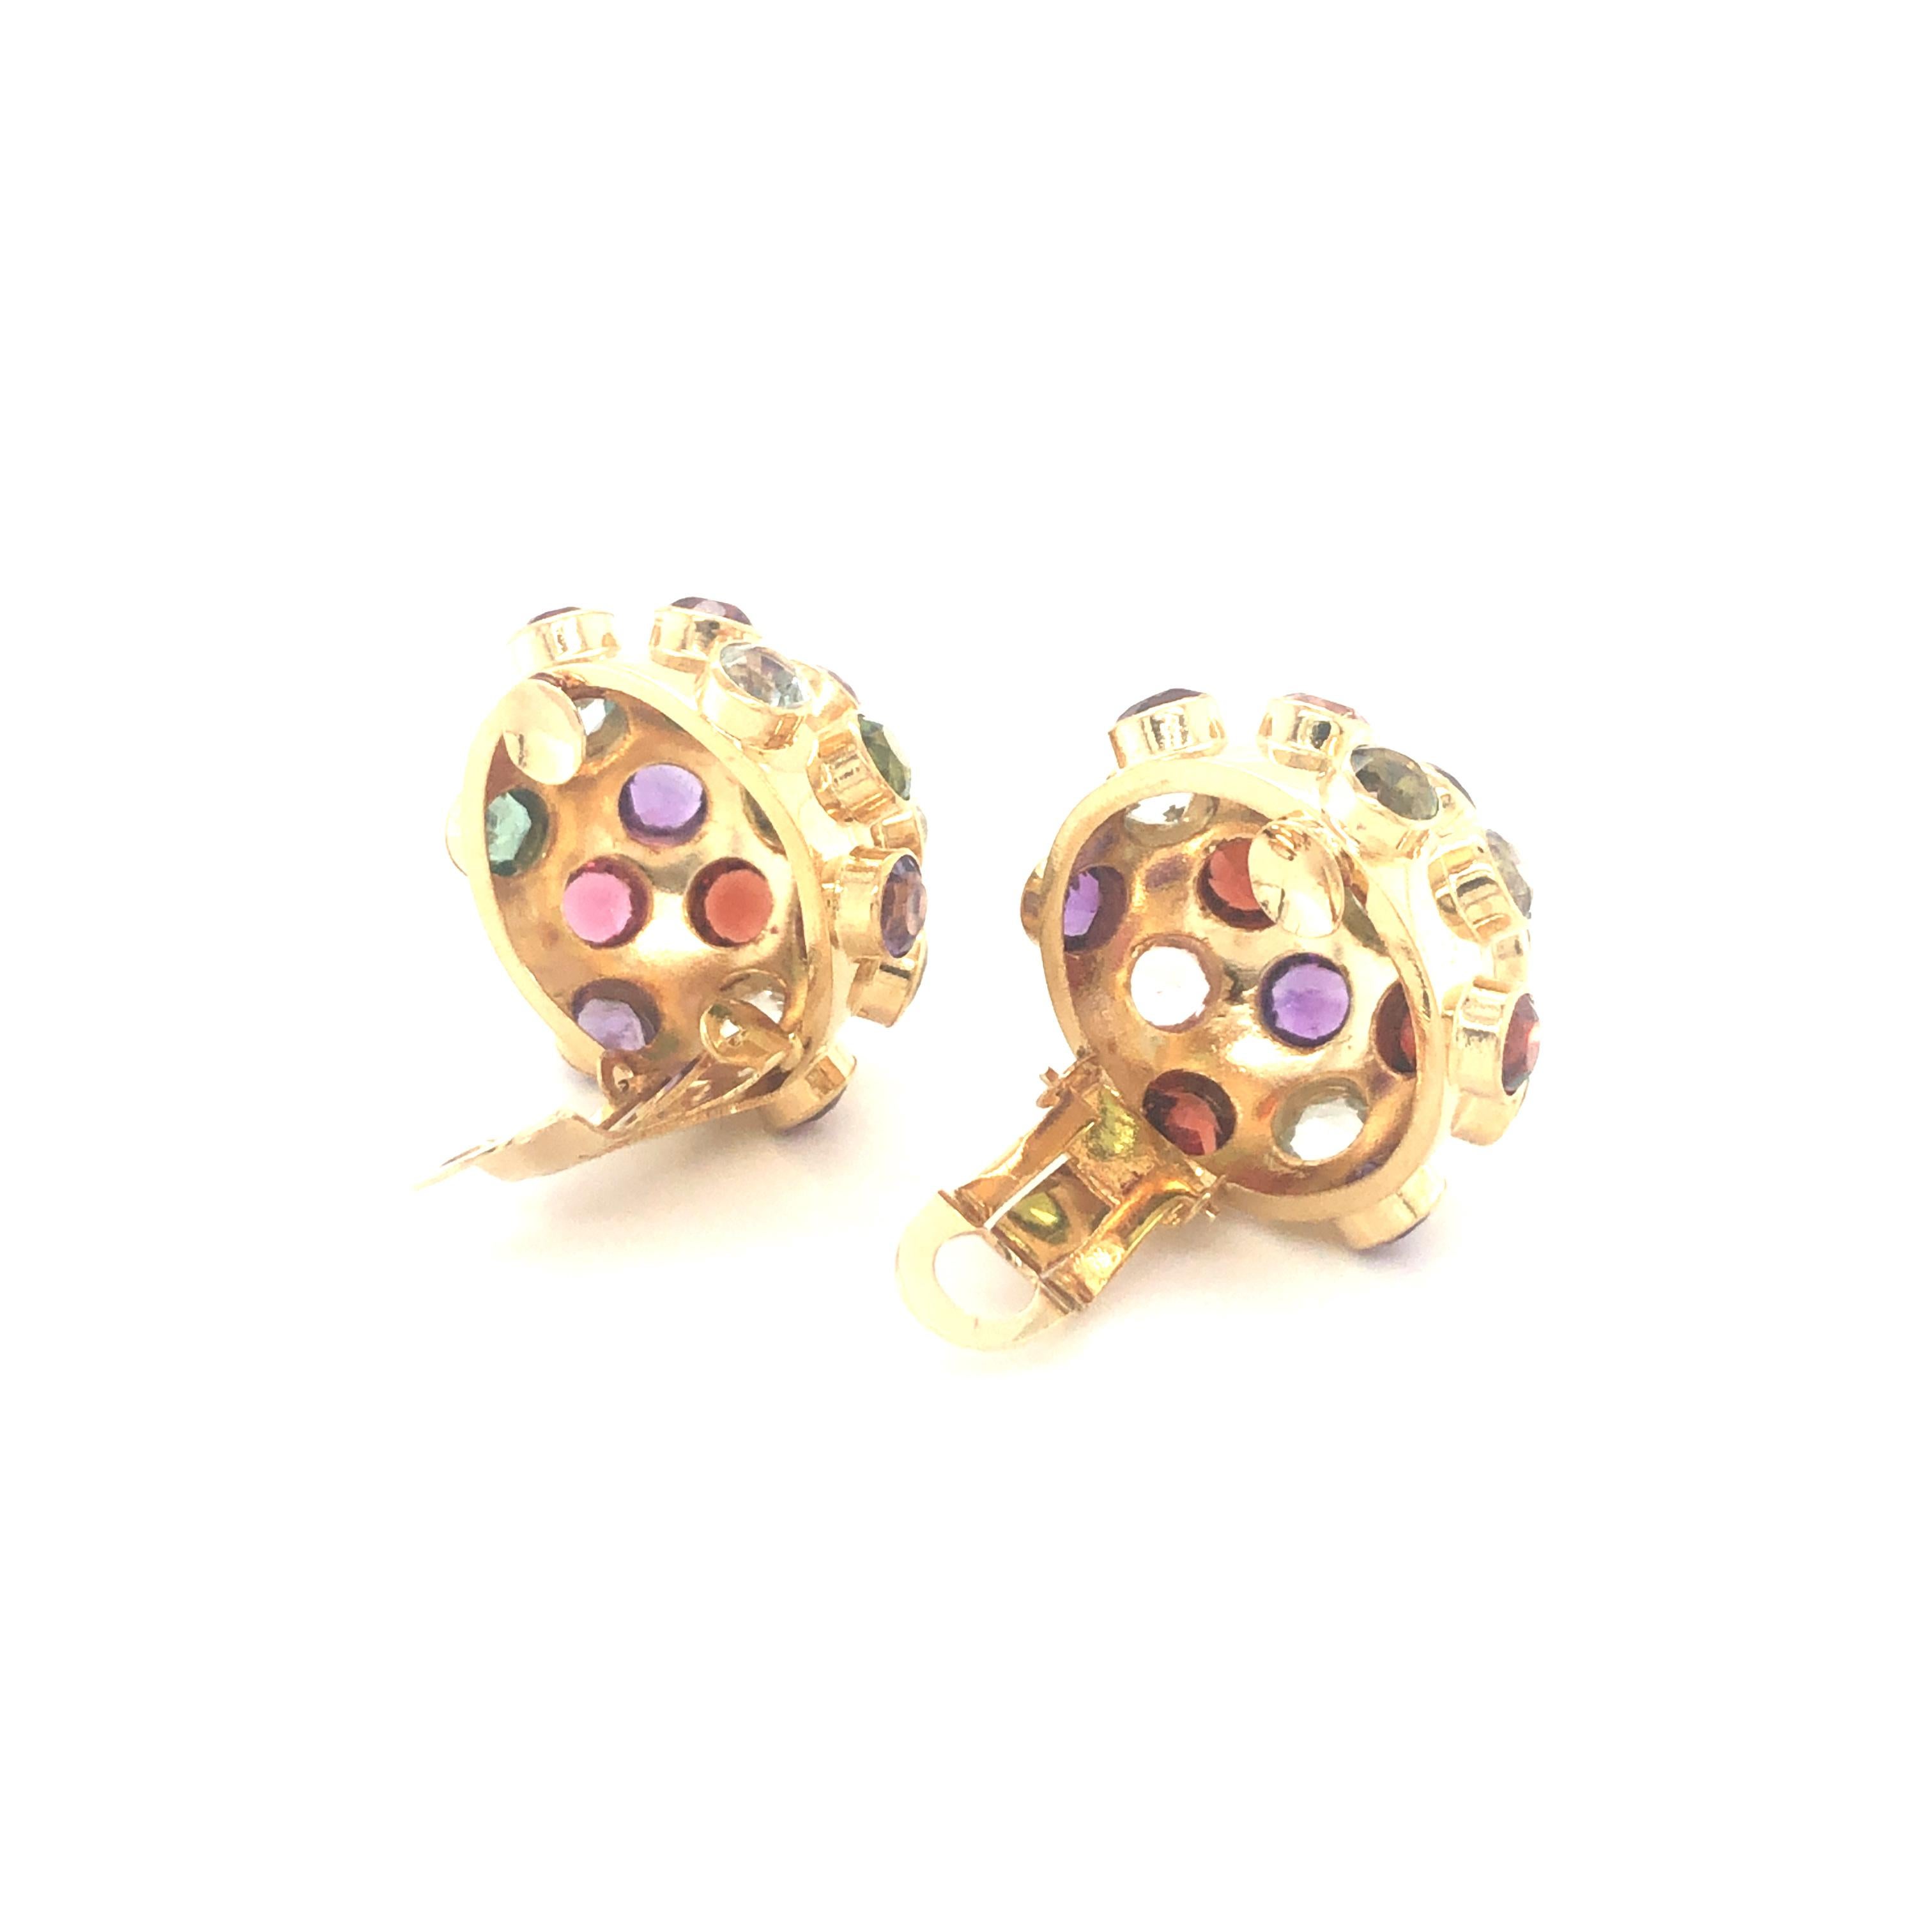 Brilliant Cut H. Stern Sputnik Earclips with Colored Gemstones in 18 Karat Yellow Gold